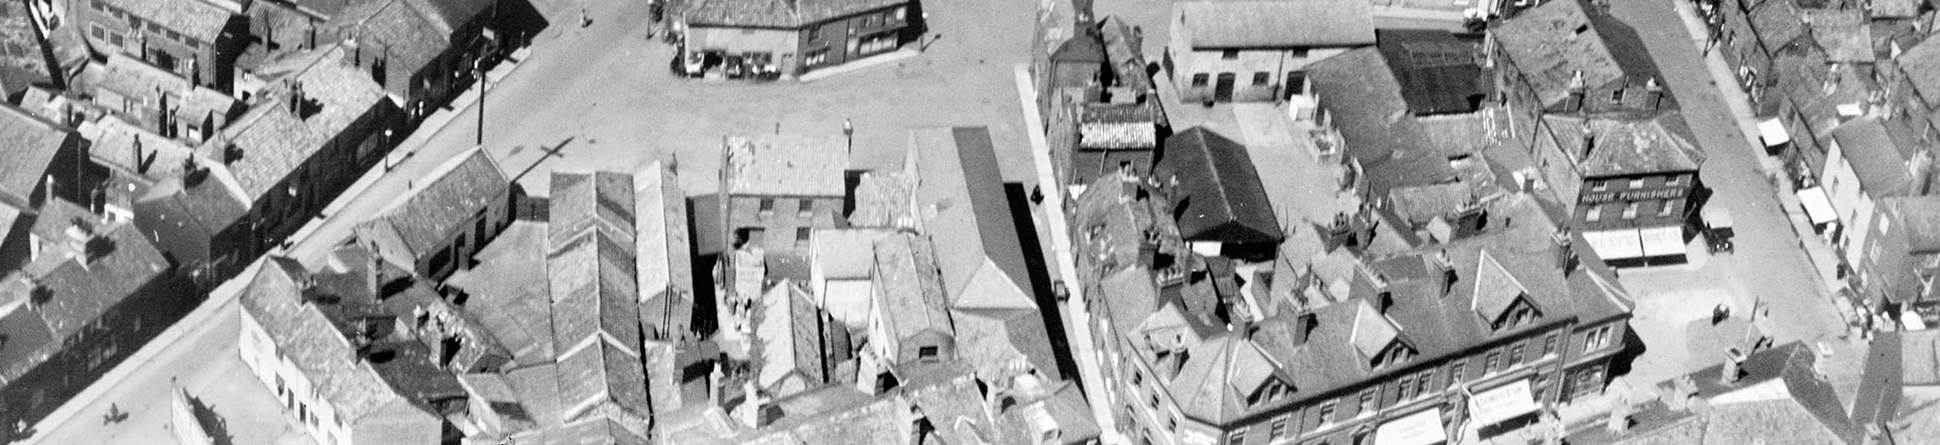 Photo shows a black and white aerial photo of residential, religious and industrial buiildings